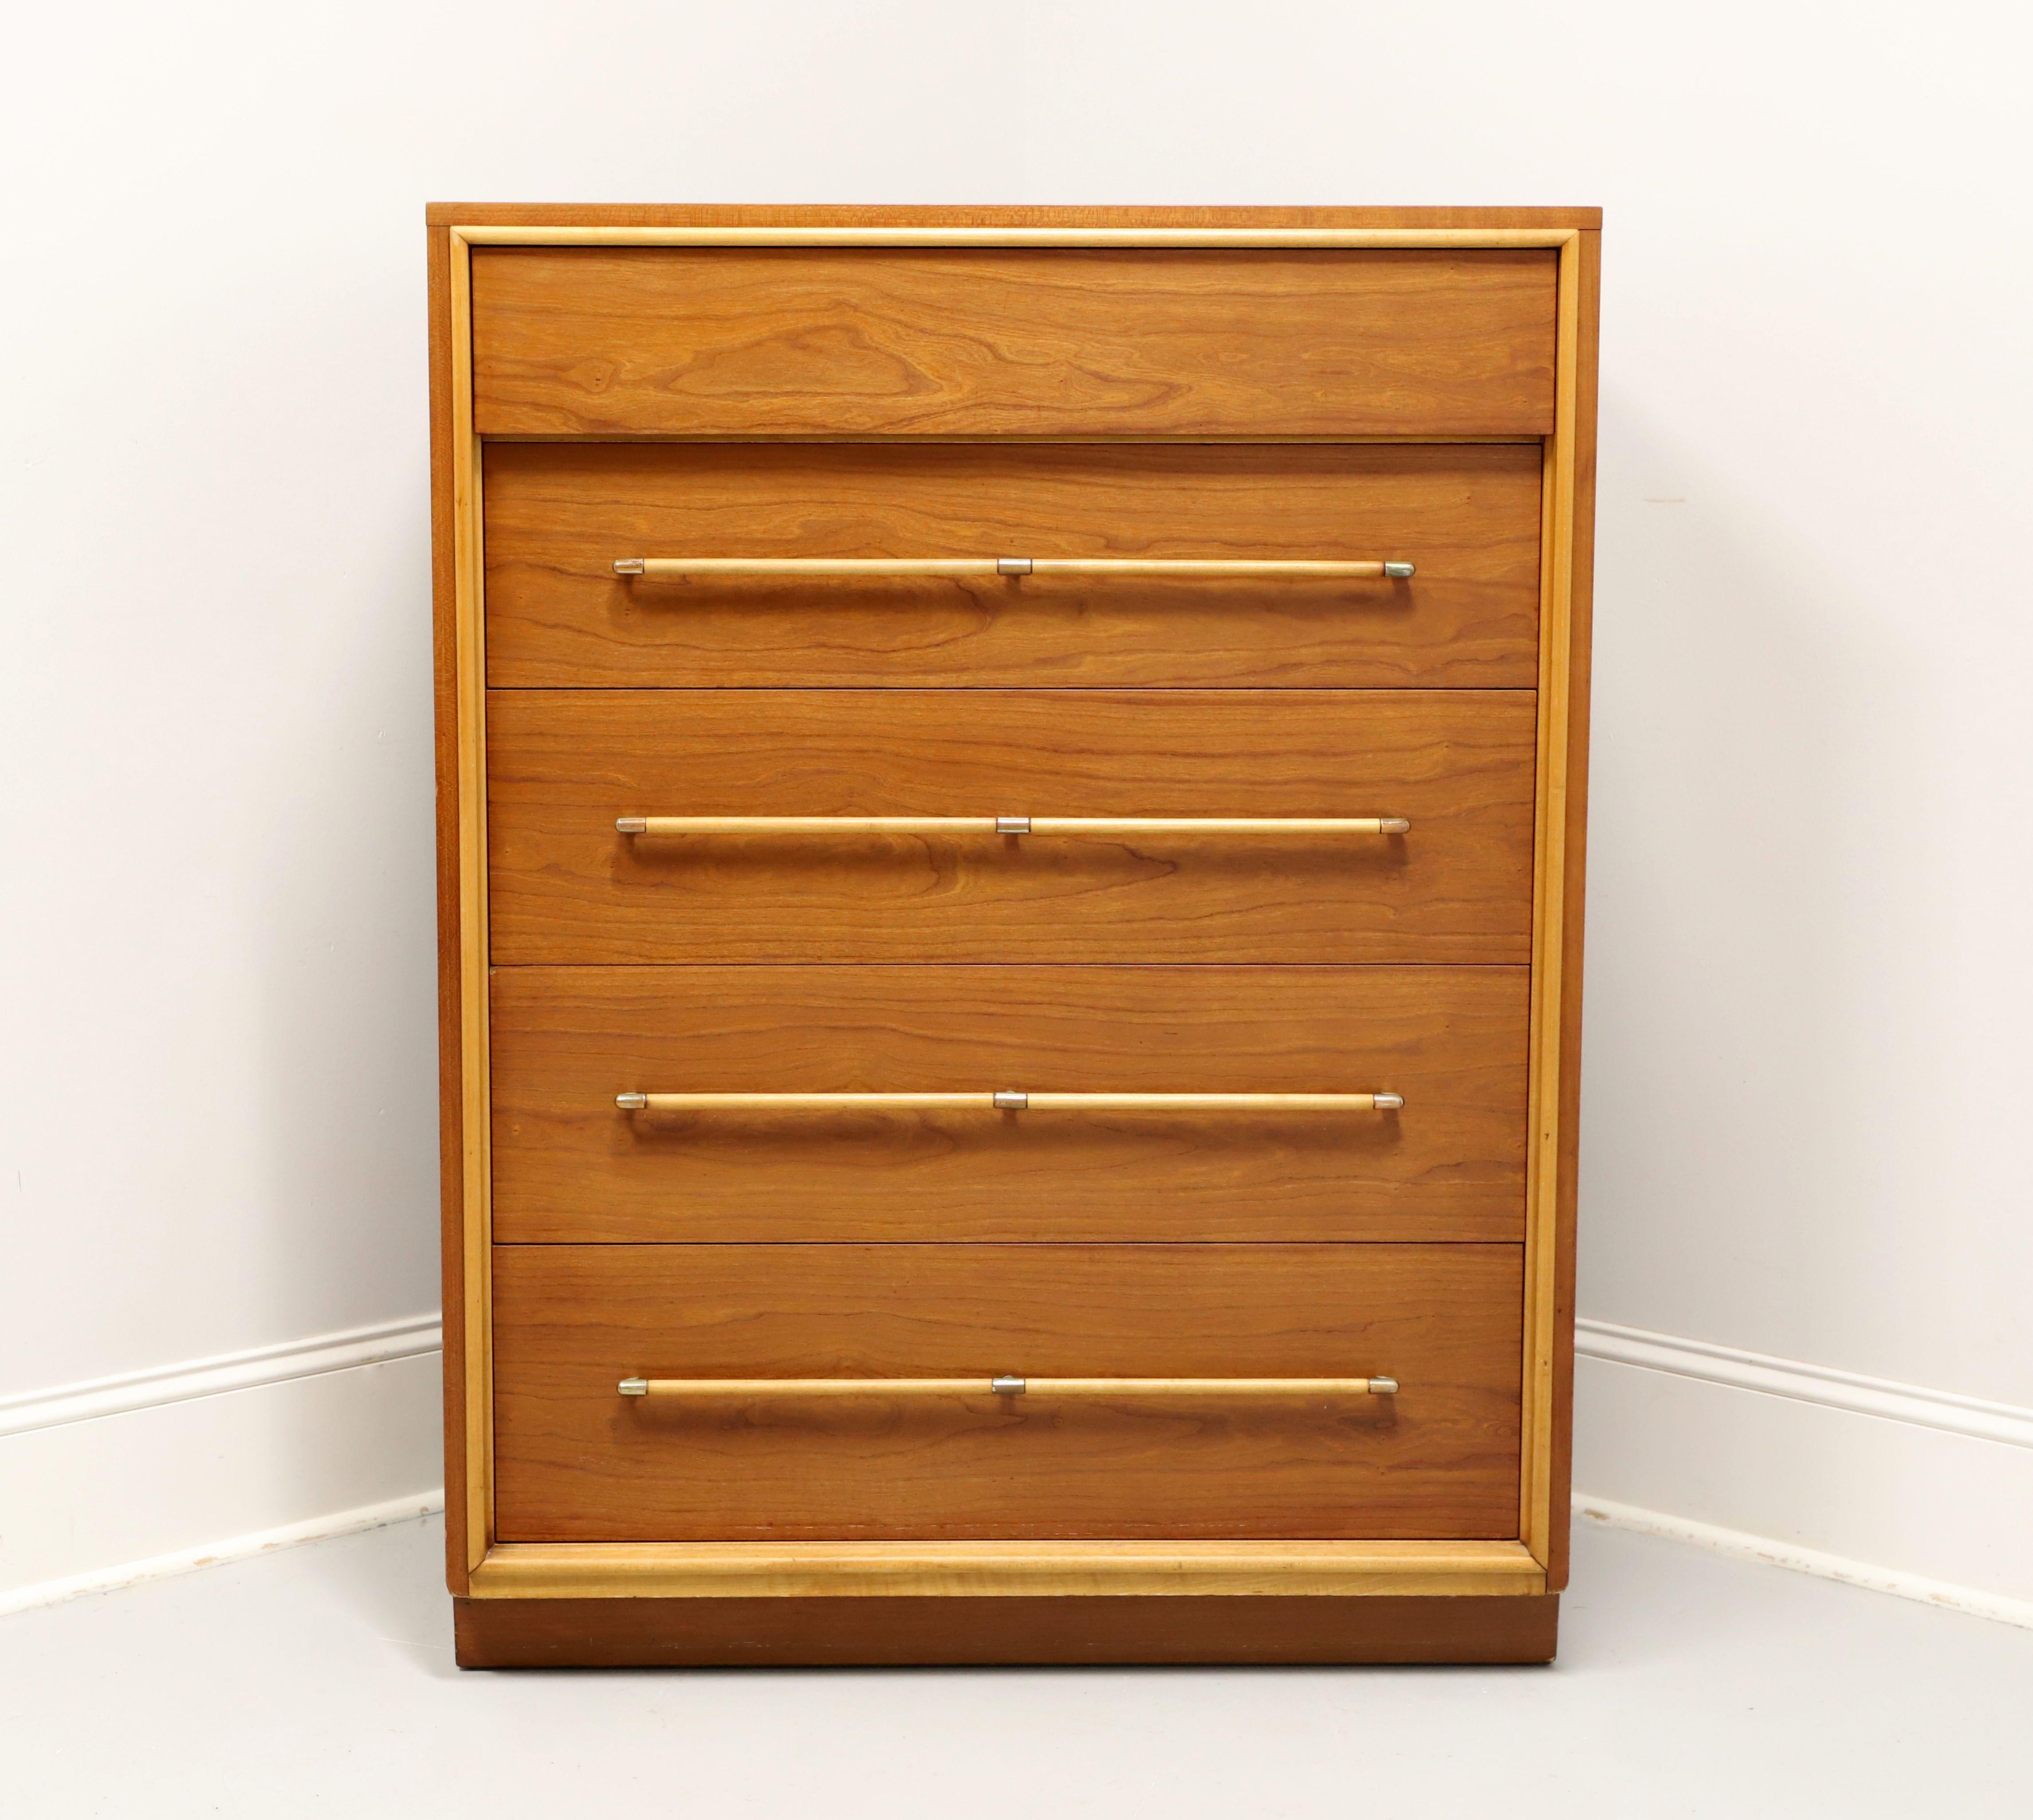 A Mid 20th Century Modern style chest of drawers by Heritage Henredon, a collaboration between Henredon and Drexel Heritage. Walnut with brass & walnut hardware, solid edge to the top, slightly recessed inward lower drawers, and a solid base.